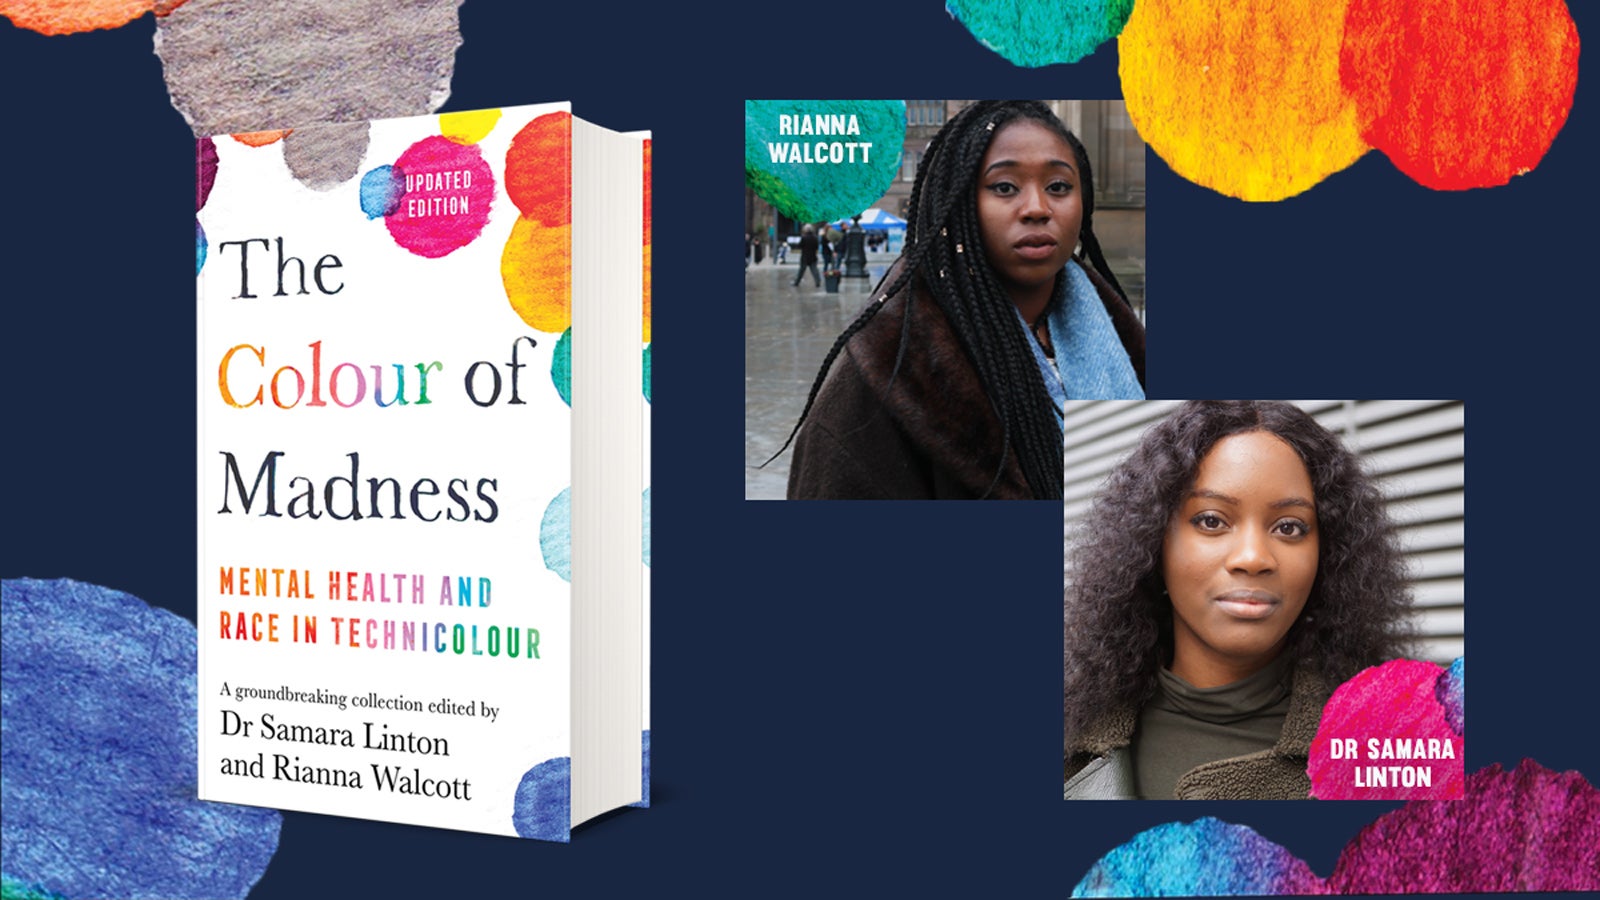 The Book cover of The Colour of Madness sits next to photographs of authors Rianna Walcott and Dr Samara Linton